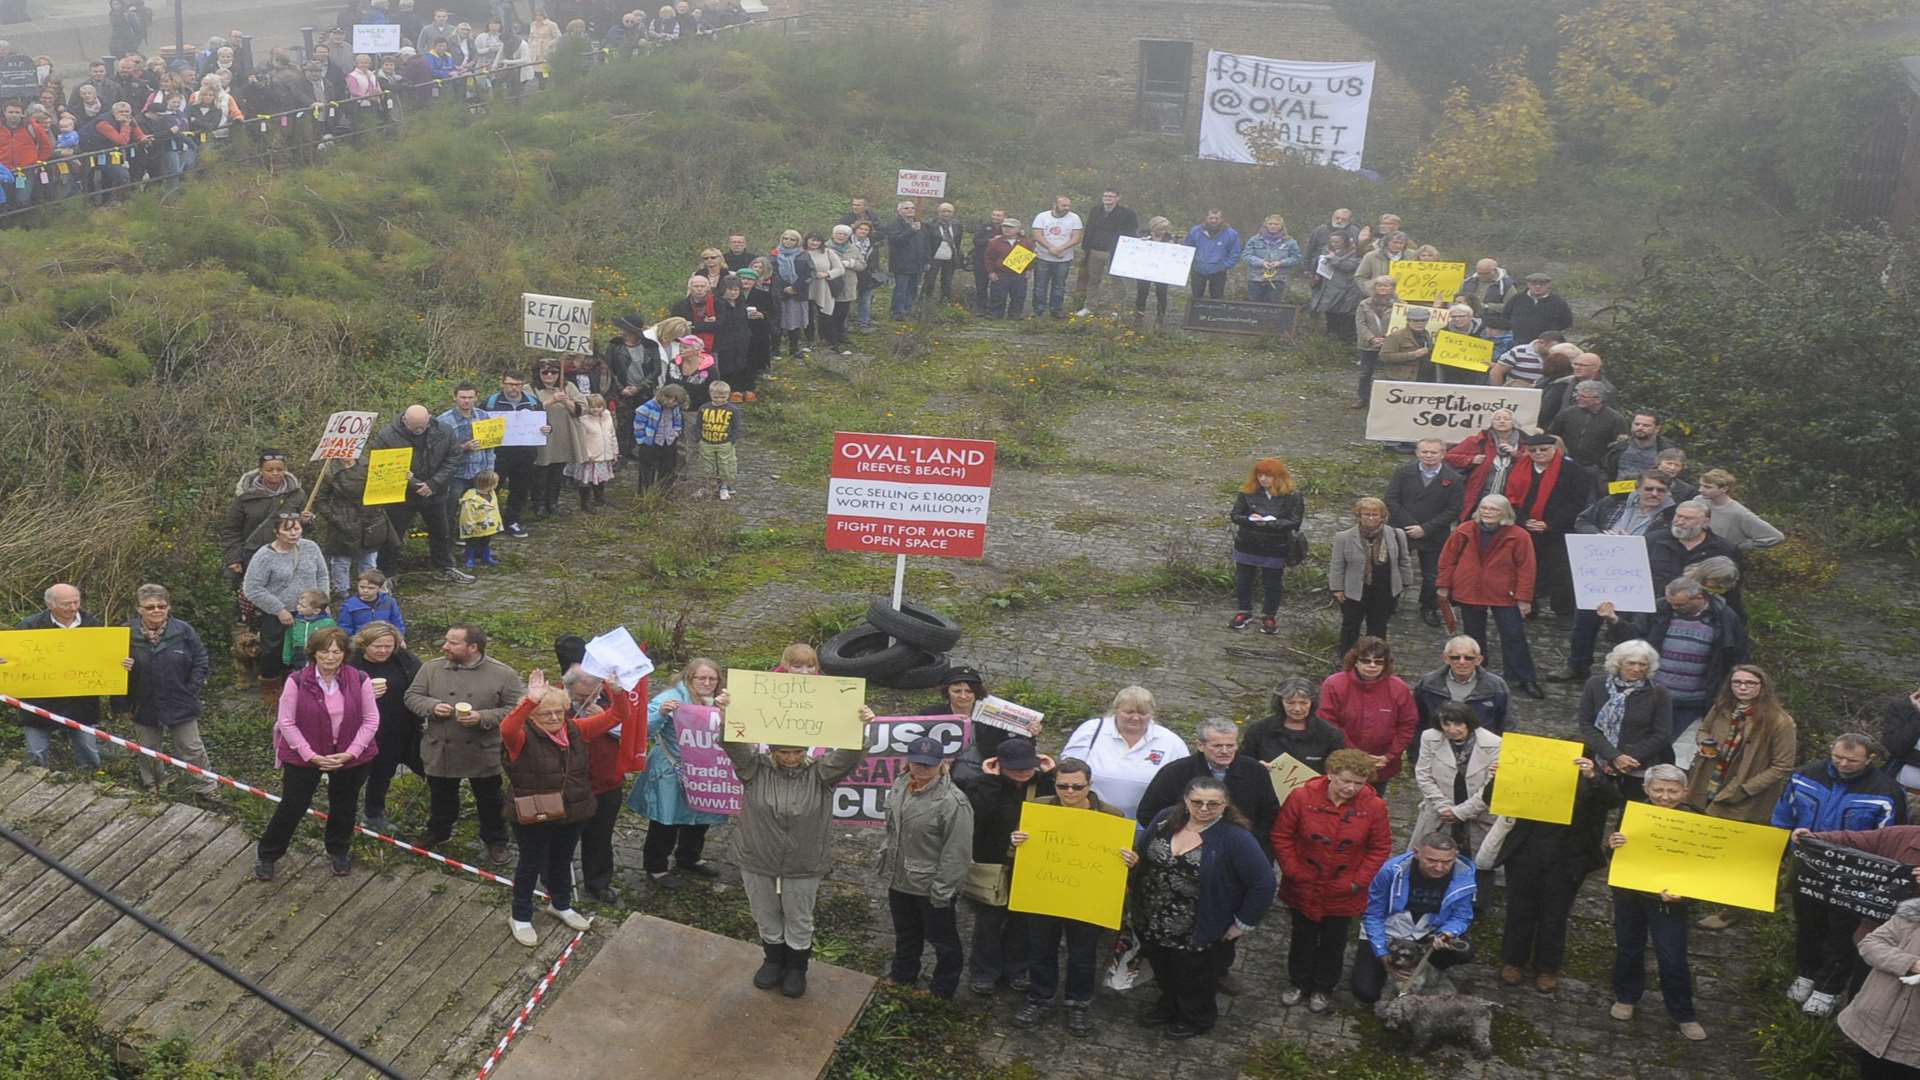 Campaigners at the Oval Chalet site in November last year